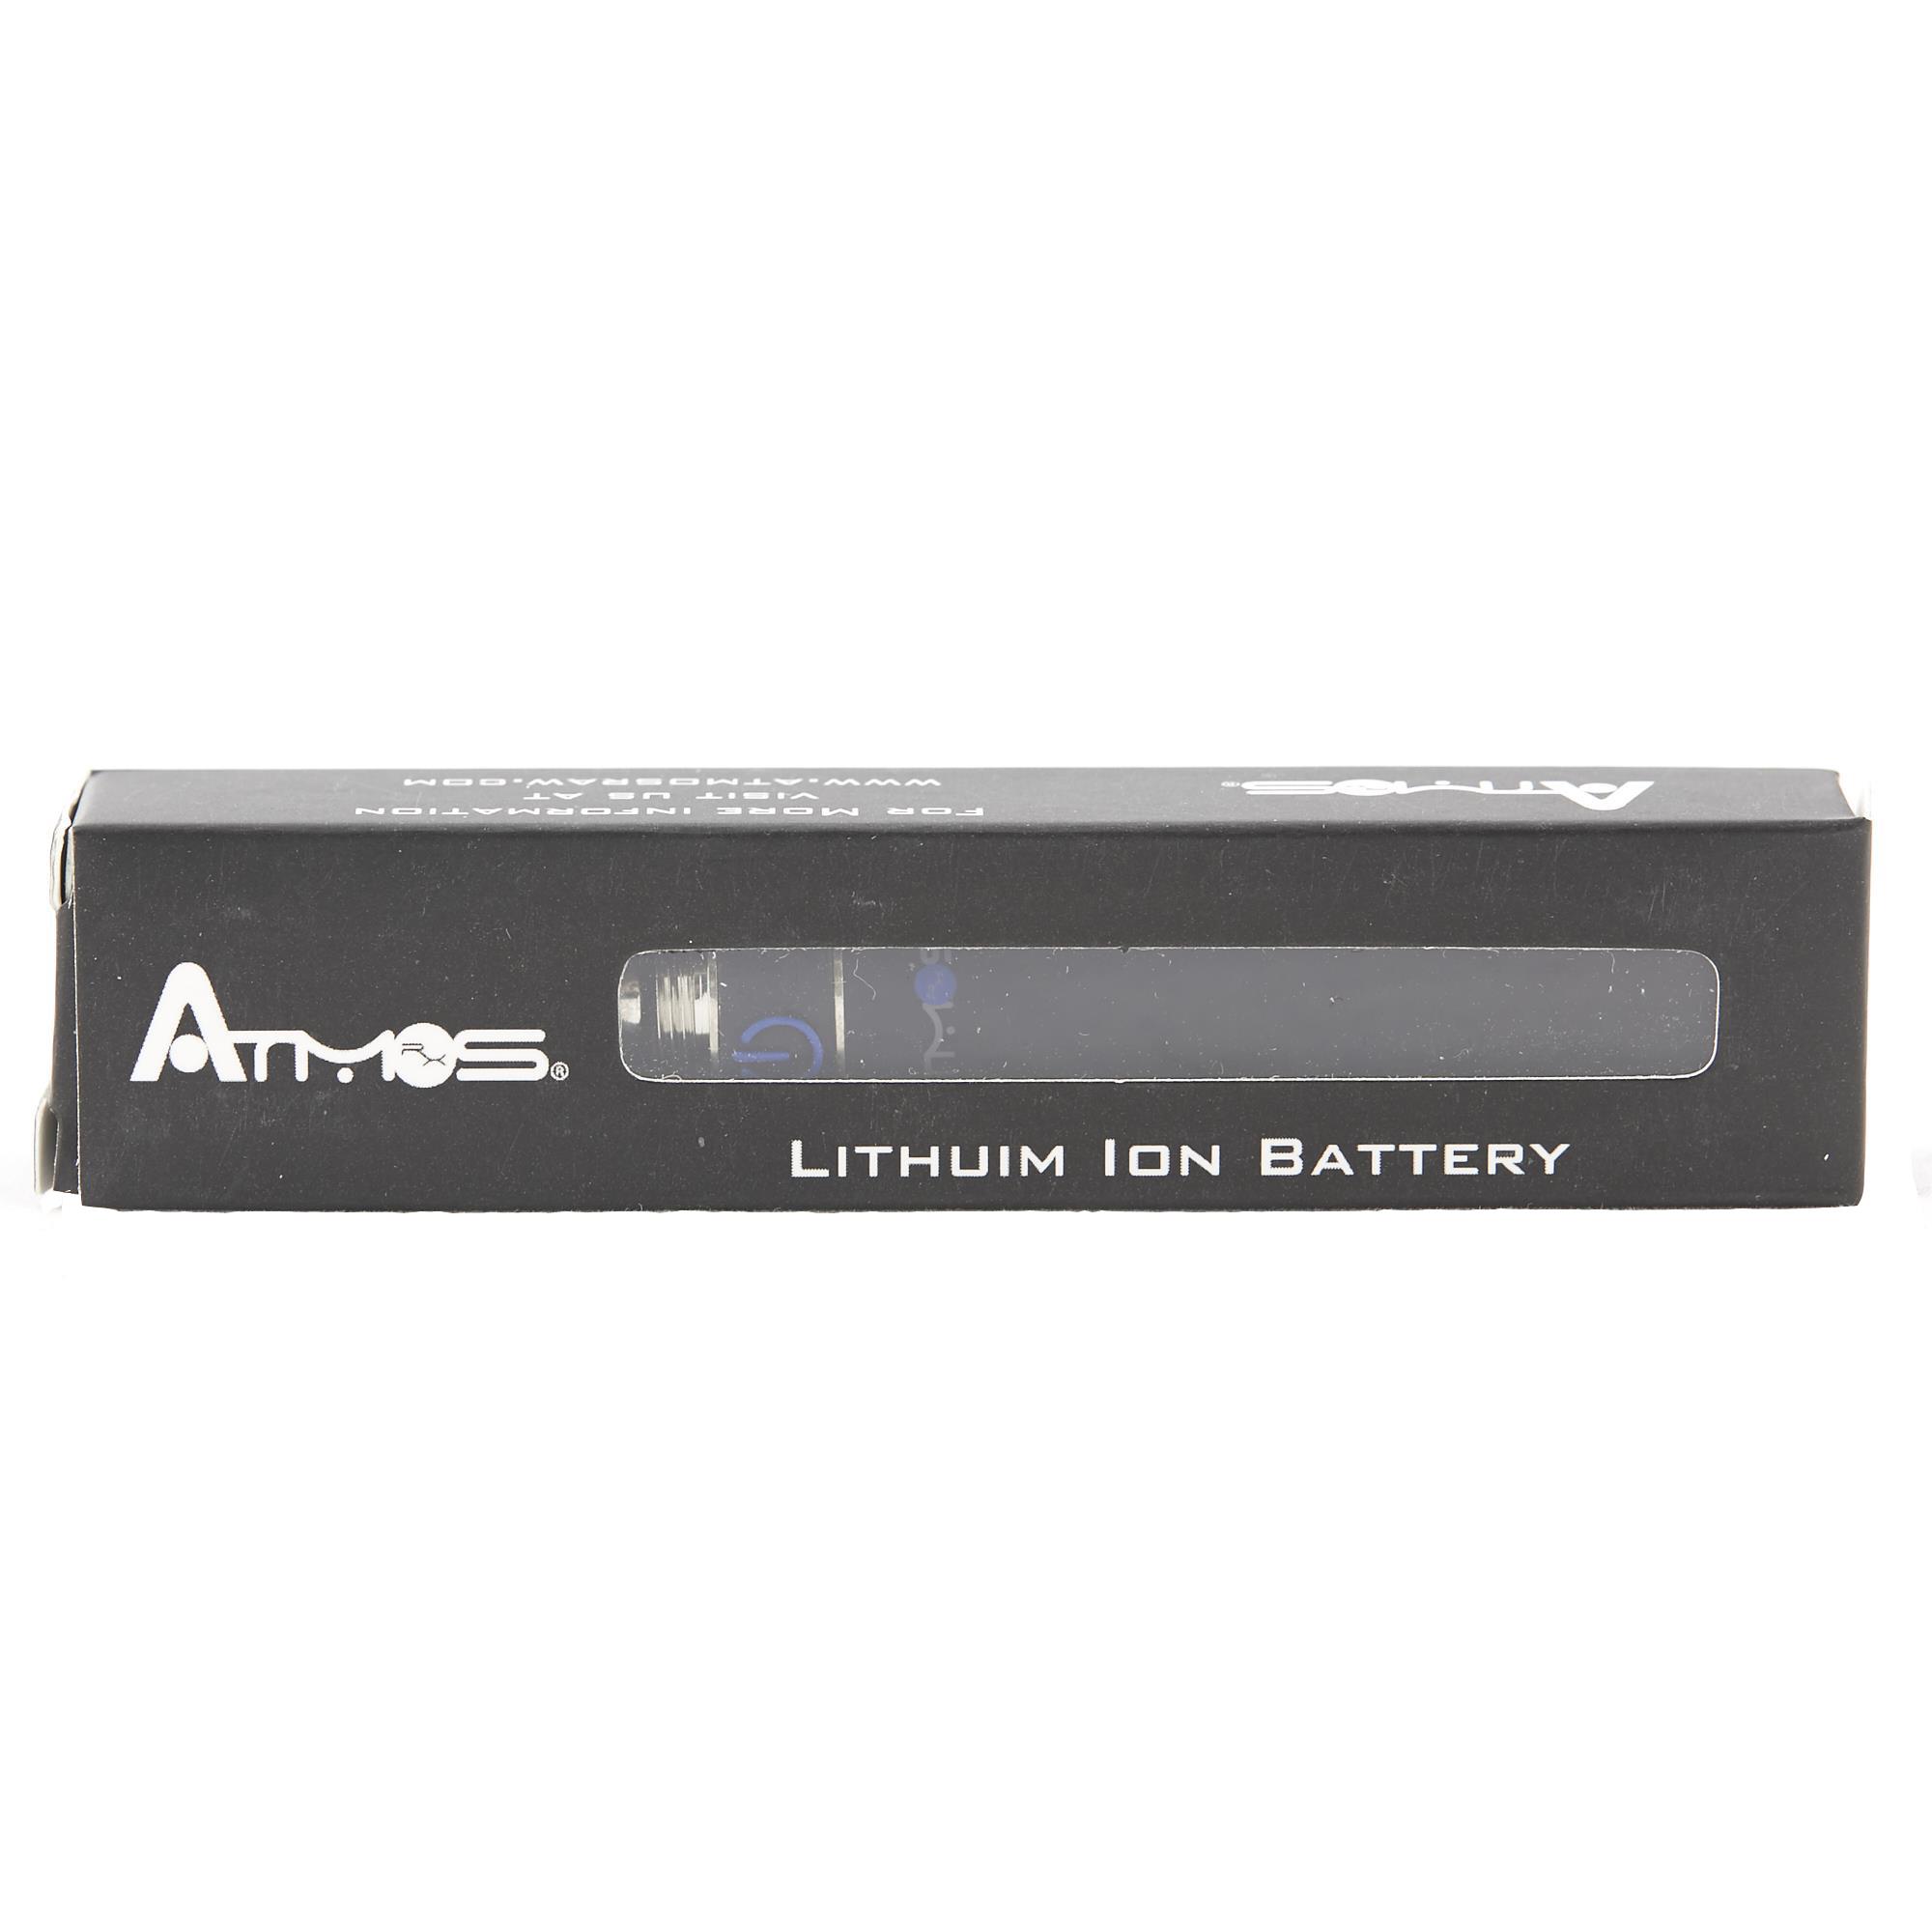 ATMOS RX DRY HERB BATTERY